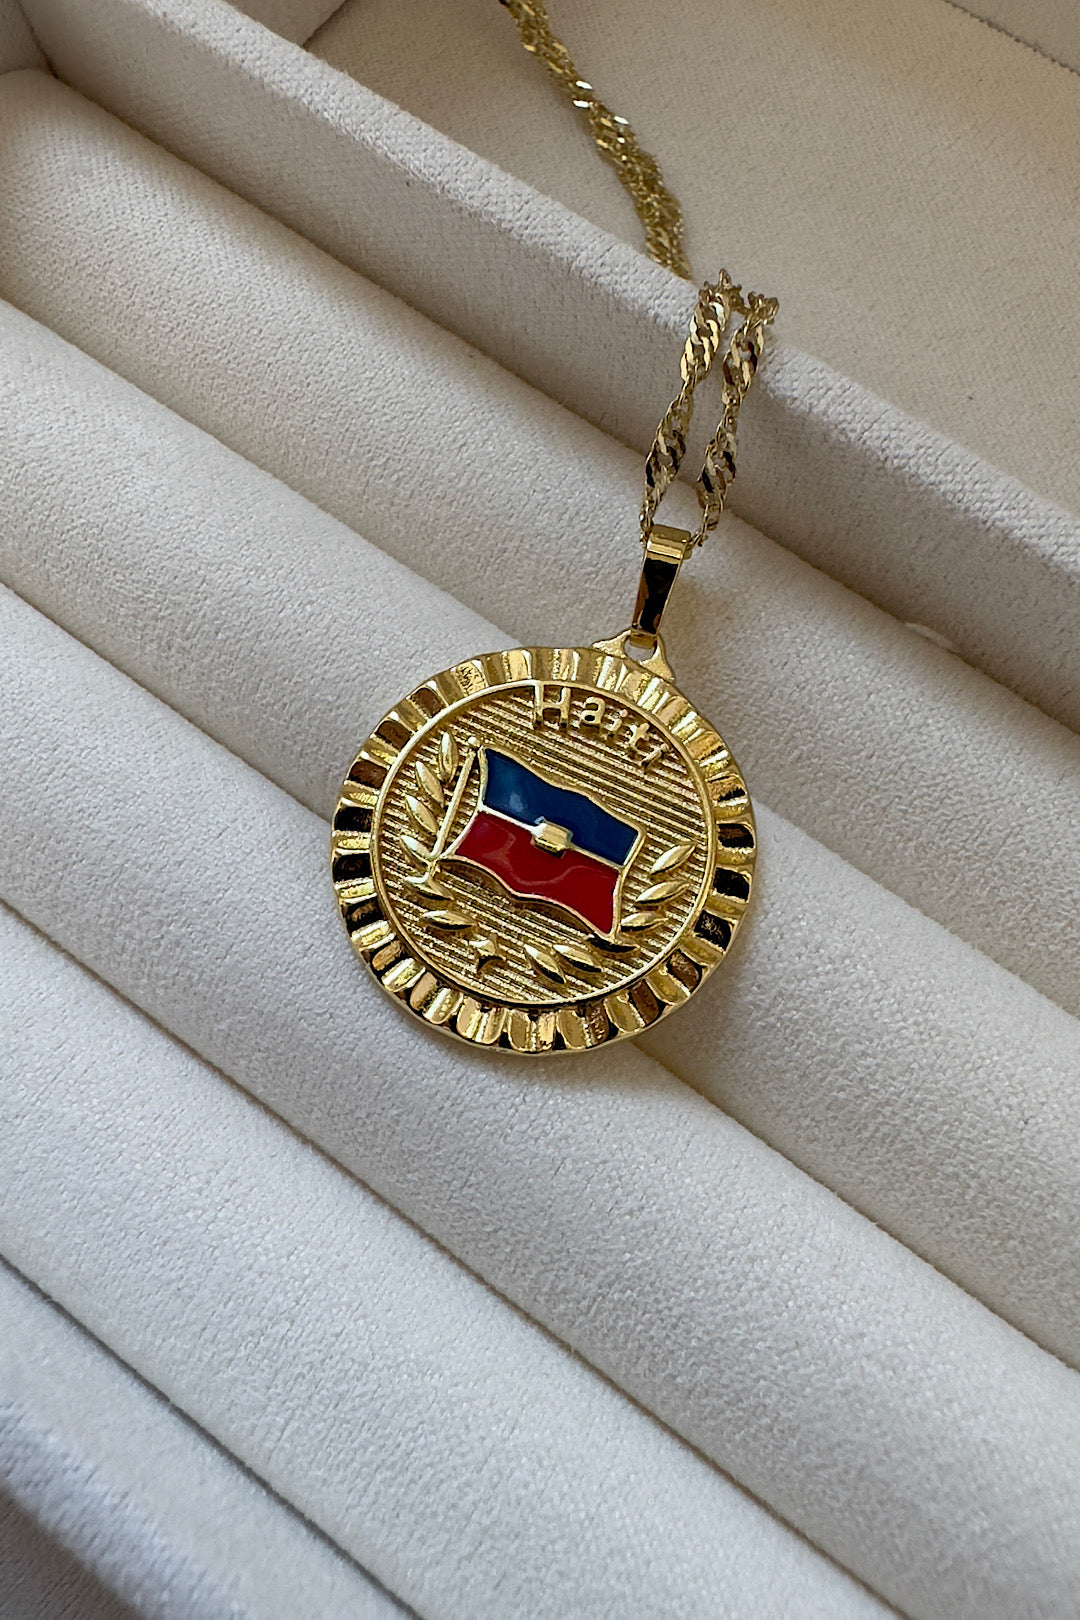 Haiti Coat of Arms Gold Necklace 